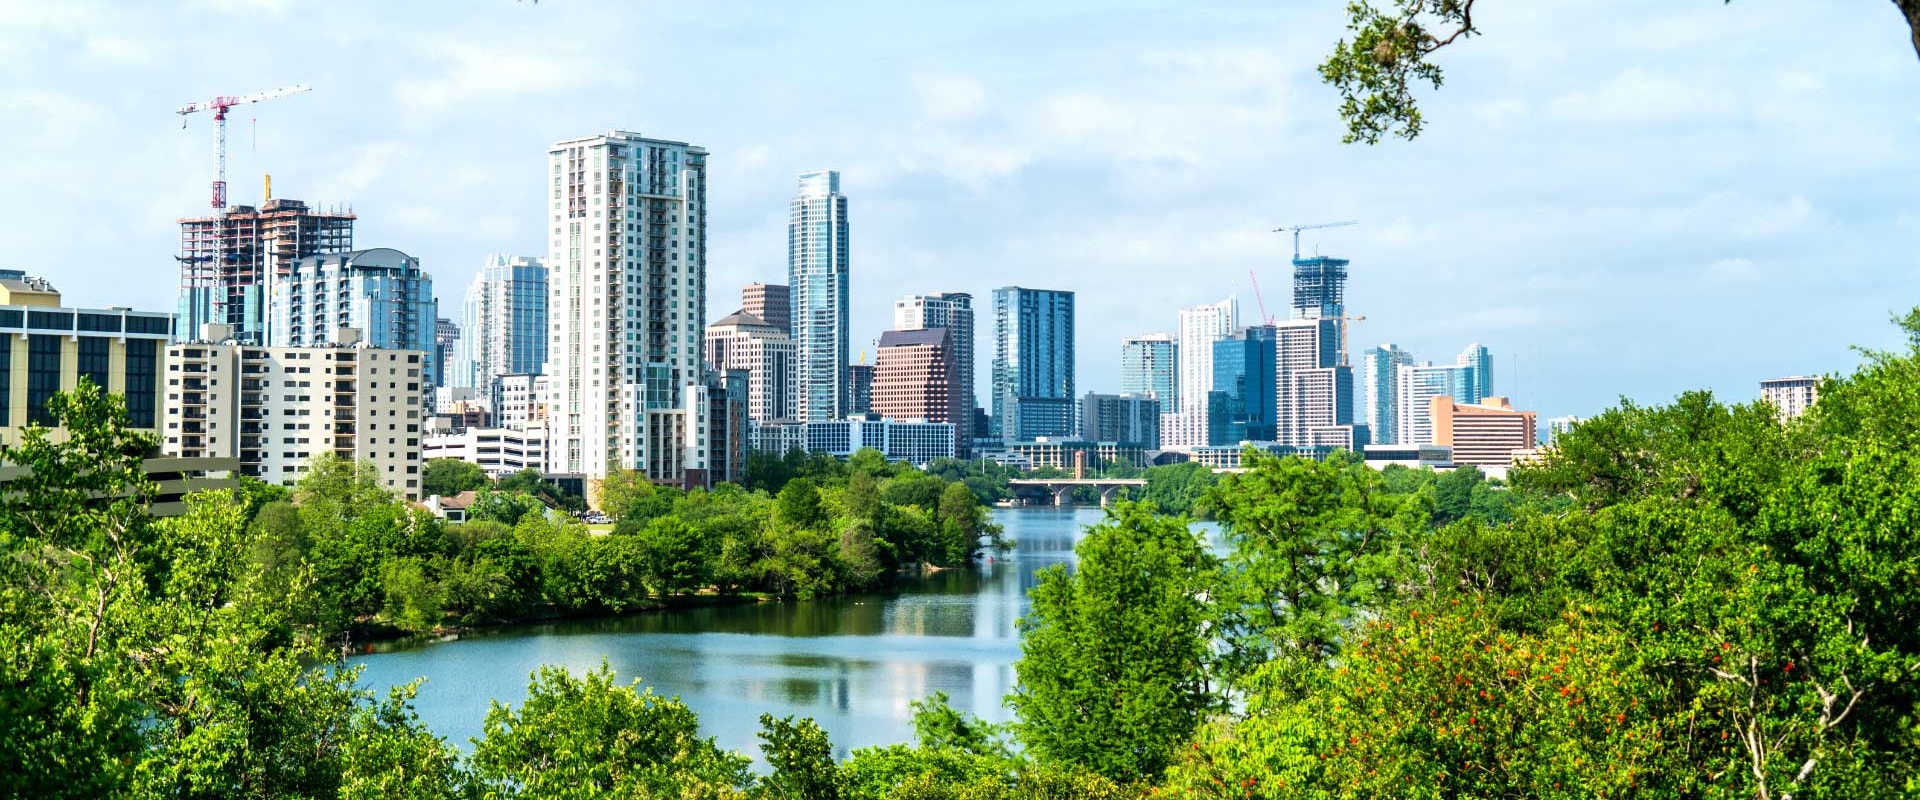 What is great about living in austin texas?